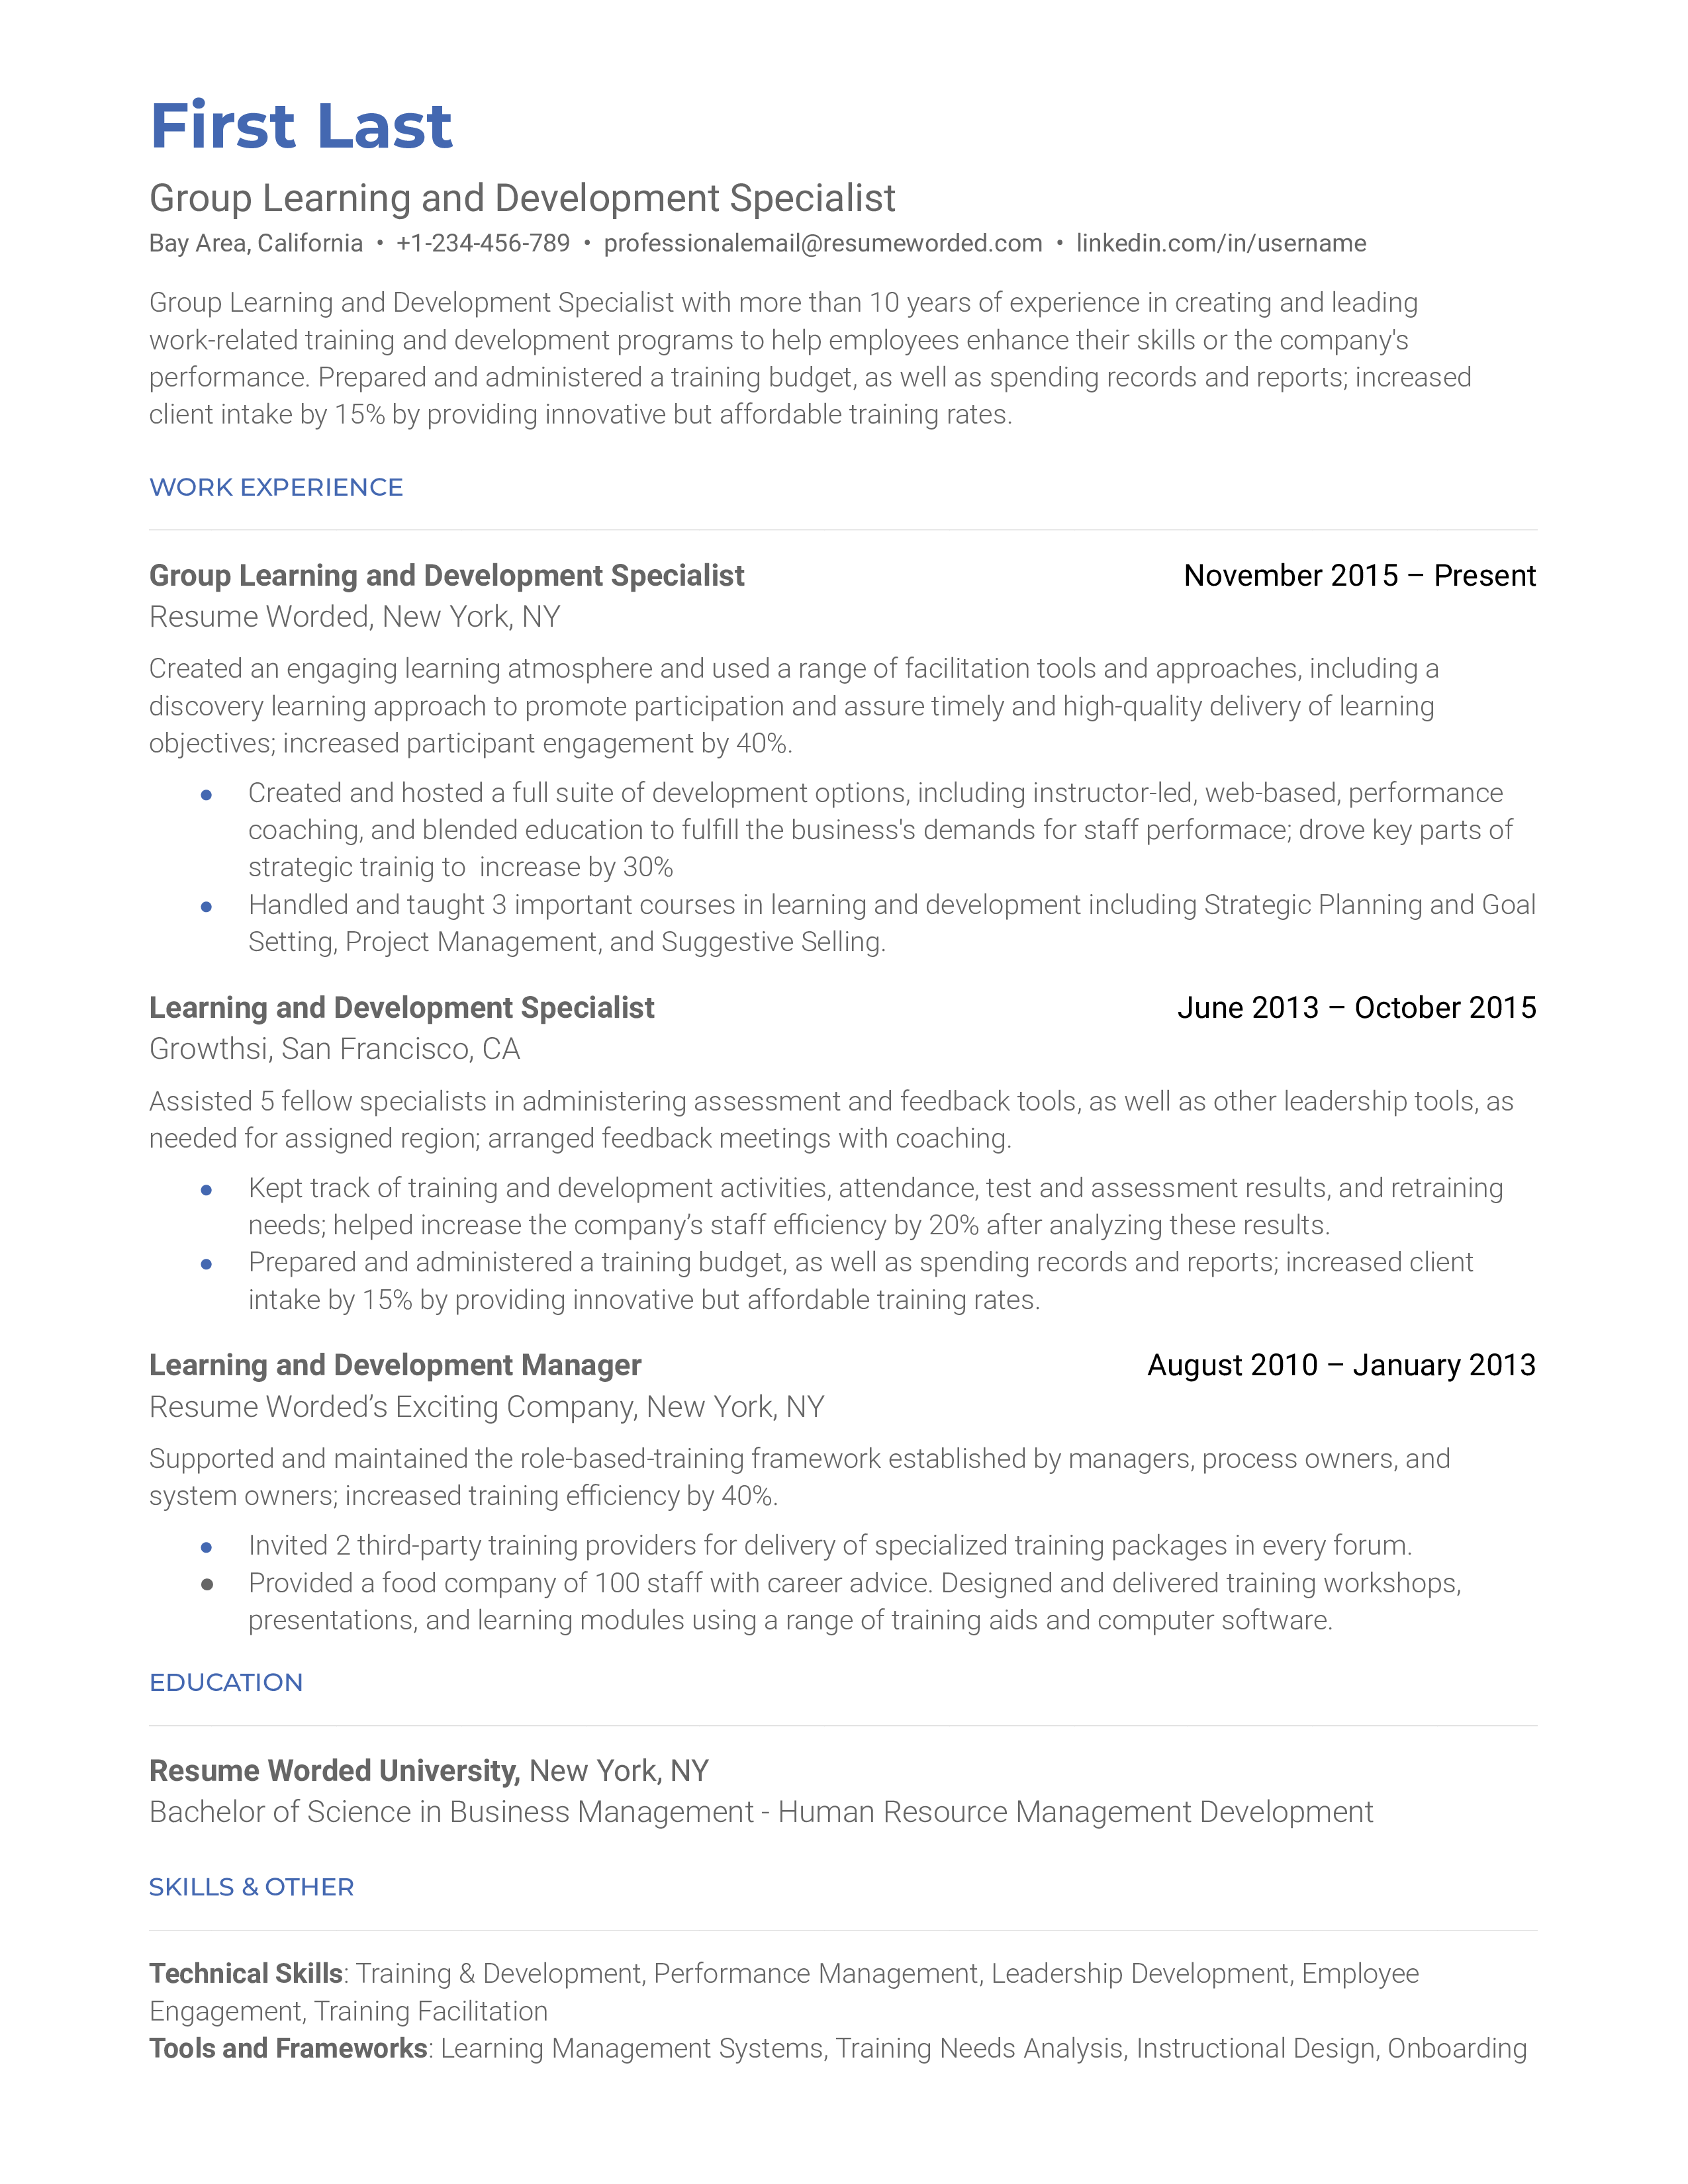 Group Learning and Development Specialist Resume Sample